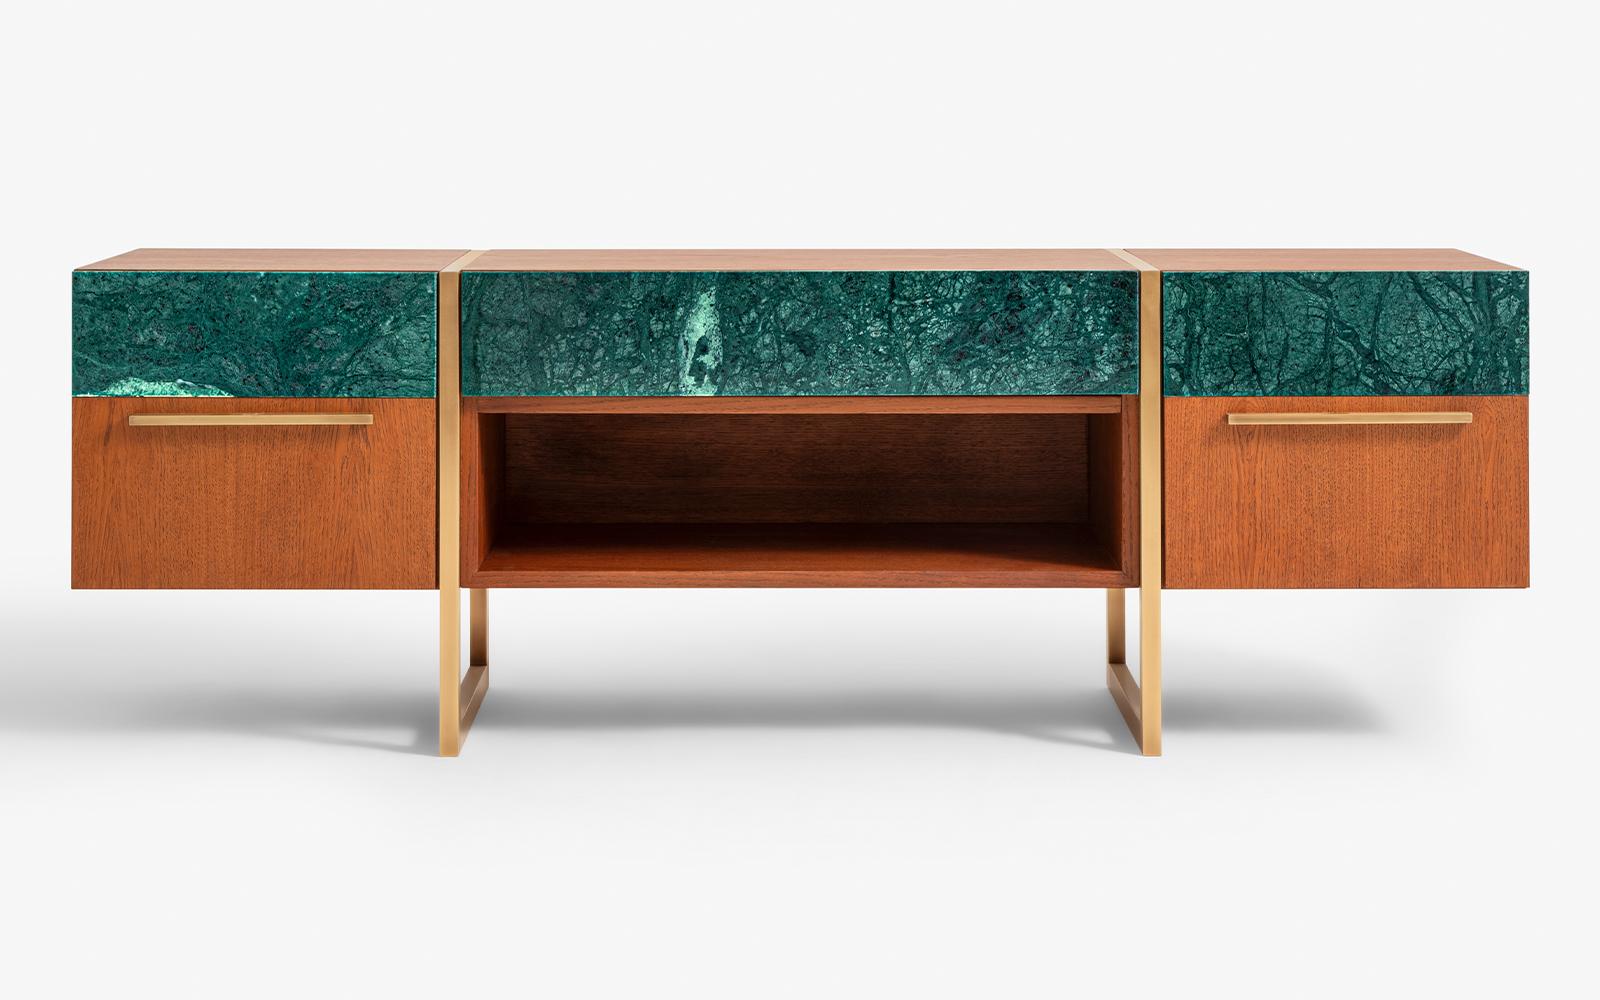 Famed Rainforest Marble TV Cabinet With Drawers by Lagu.
Designed by Ufuk Ceylan.
Dimensions: W 150 x D 42 x H 50 cm.
Materials: Wood, Brass, Marble, Oak.

Surrounded by oak veneer and rainforest marble with aged brass, the FAMED TV UNIT